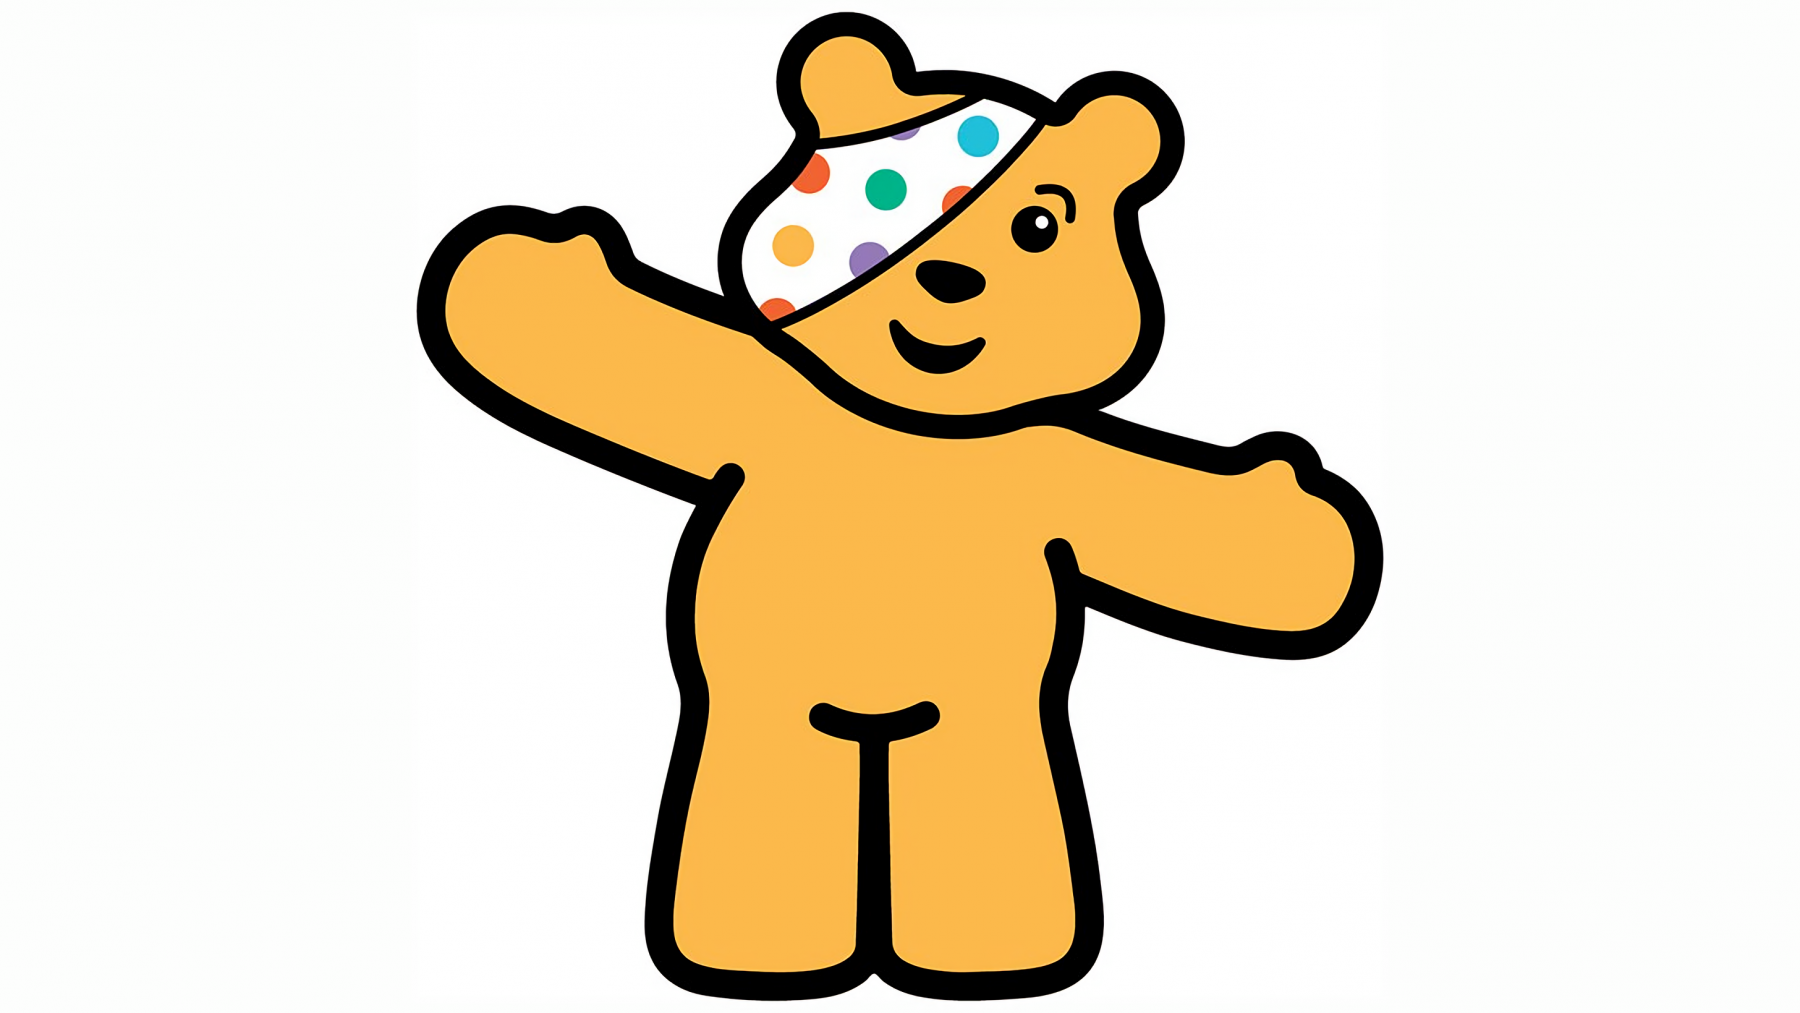 BBC Children in Need 2022: Everything you need to know Prolific North